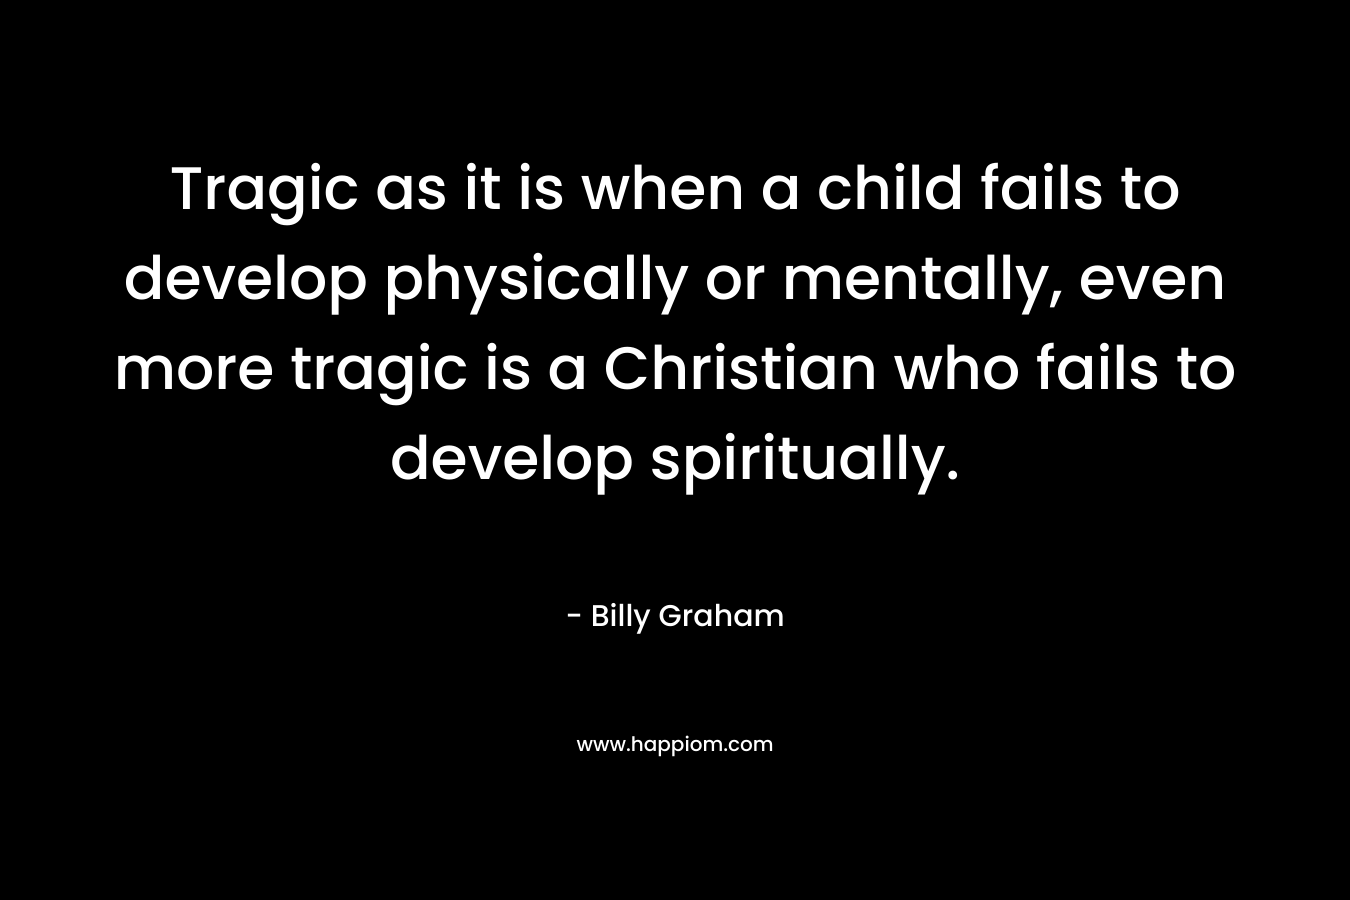 Tragic as it is when a child fails to develop physically or mentally, even more tragic is a Christian who fails to develop spiritually.